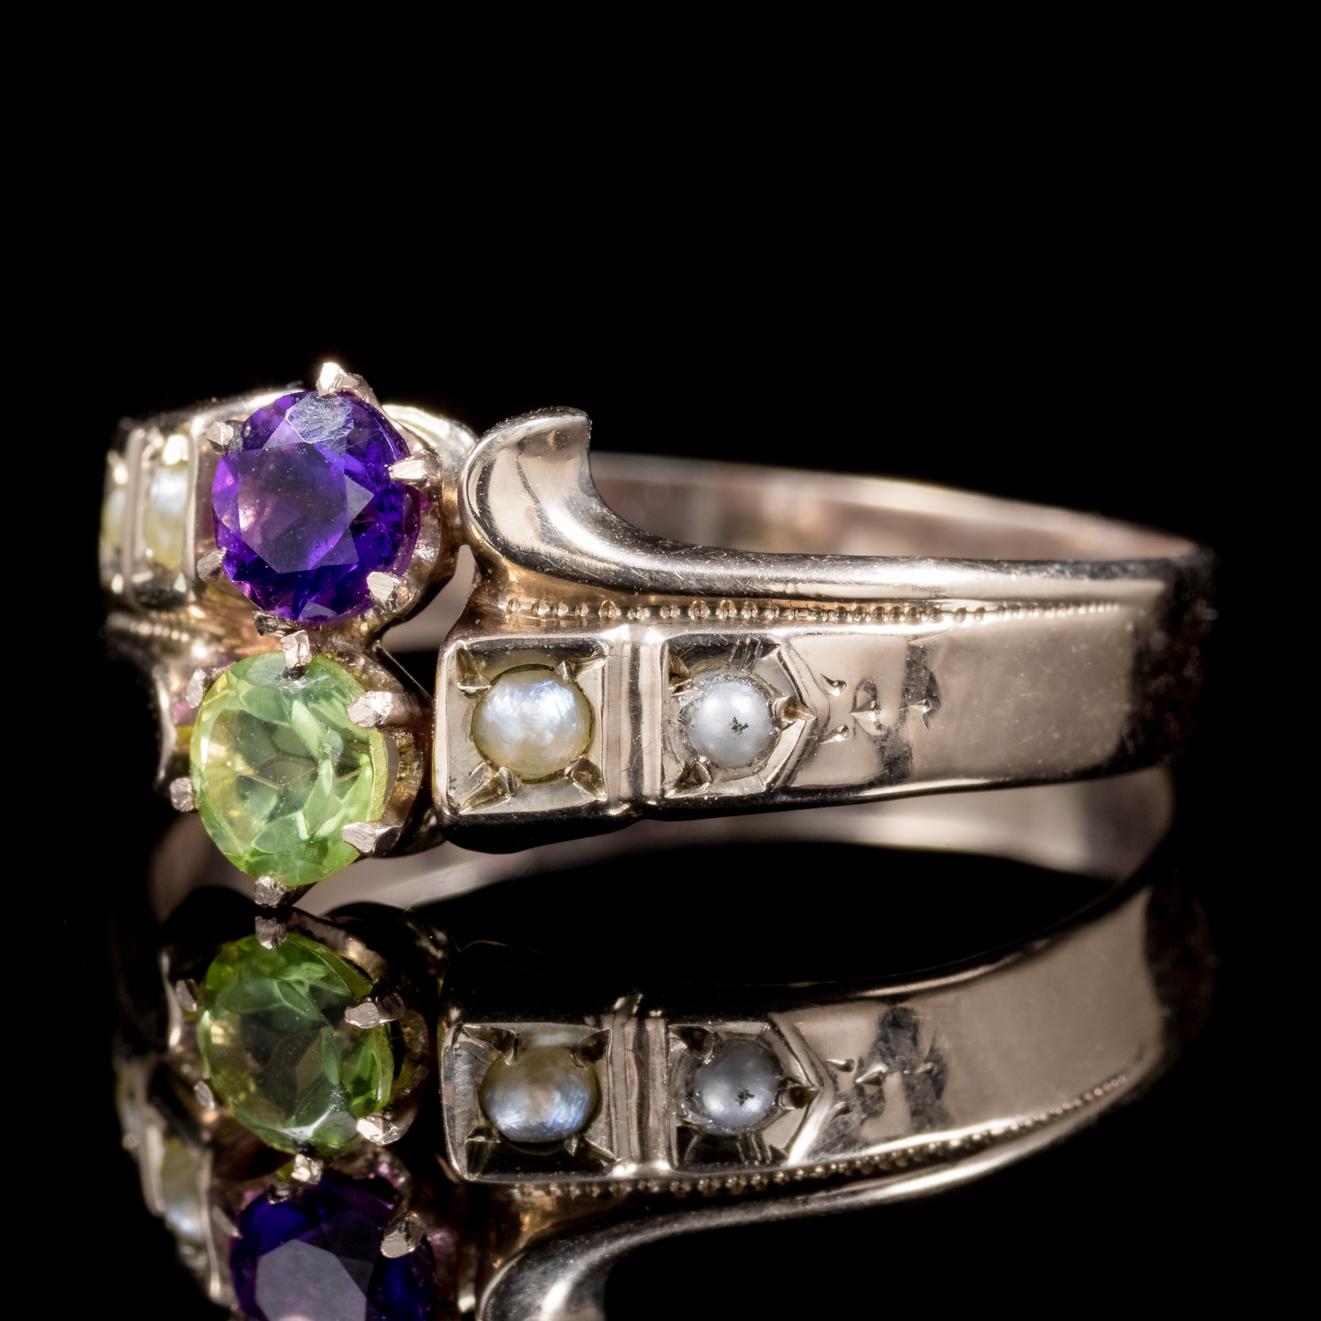 A stunning antique Victorian ring C. 1900, set with a 0.18ct violet Amethyst a 0.18ct green Peridot and four lovely Pearls which together represent the Suffragette movement. 

Suffragettes liked to be depicted as feminine, their jewellery popularly